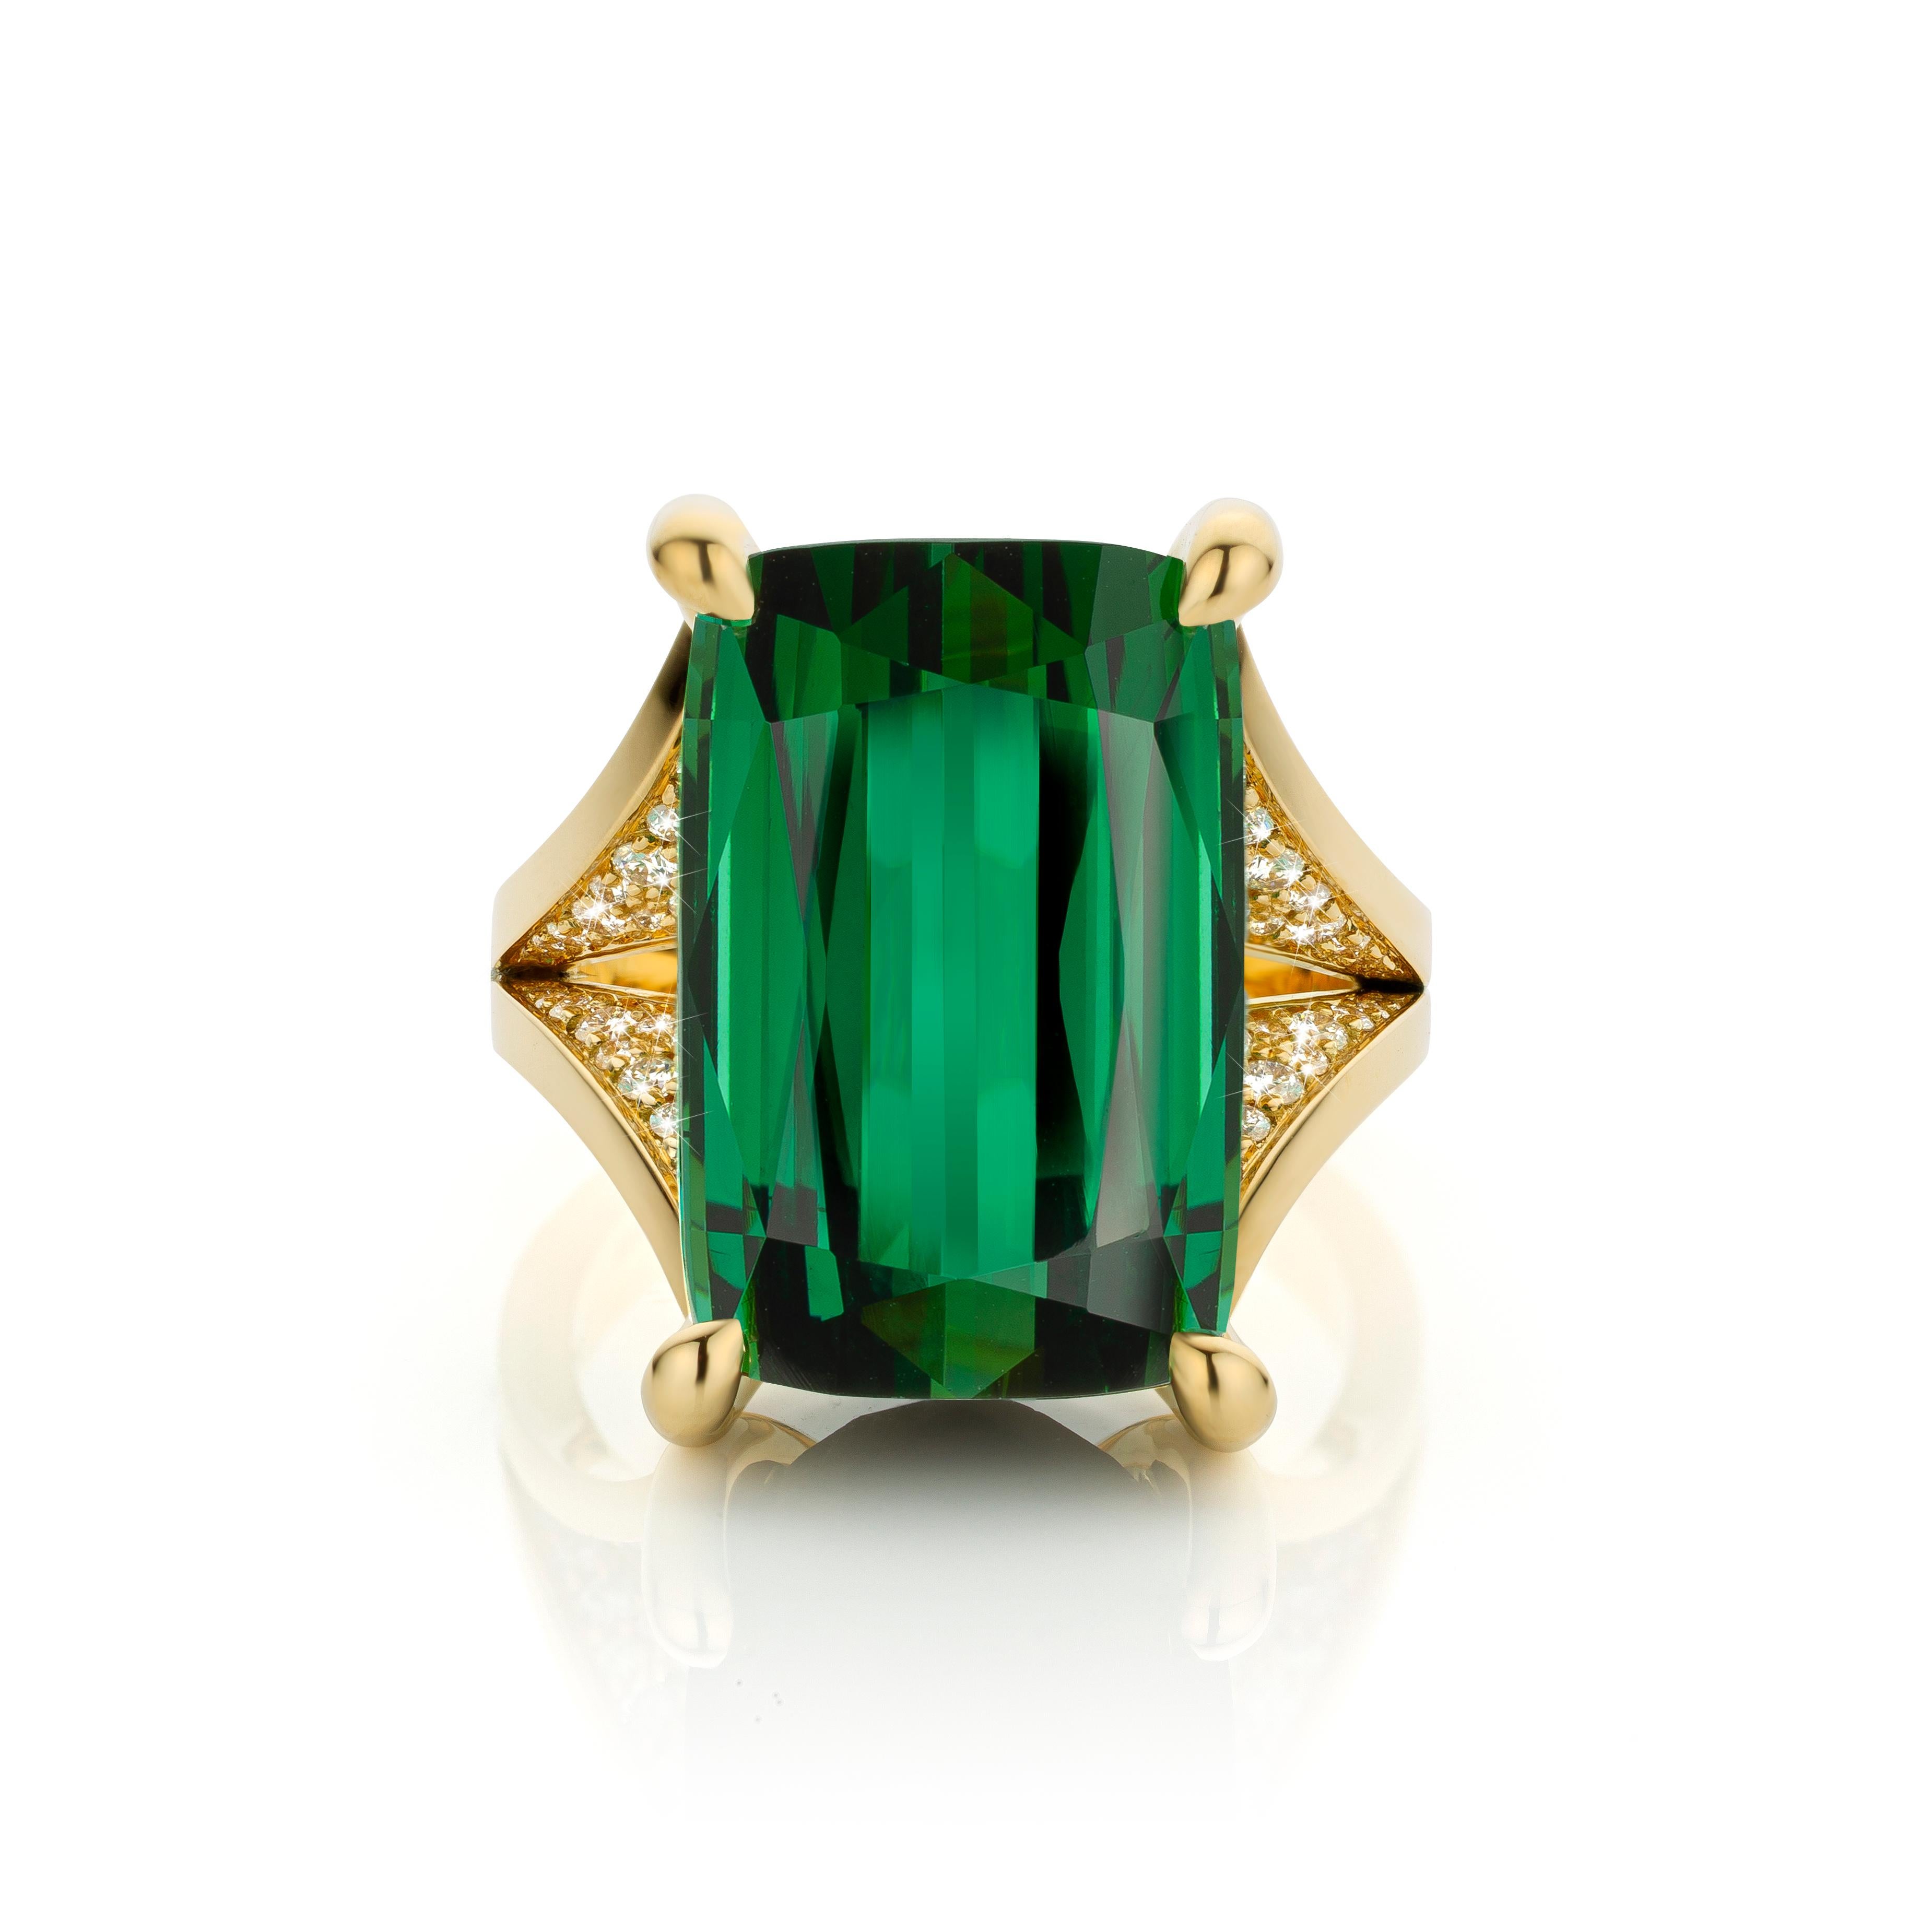 Brilliant Cut Cober “Stunning Green” with a 8.09 Carat Tourmaline and 56 Diamonds Fashion Ring For Sale